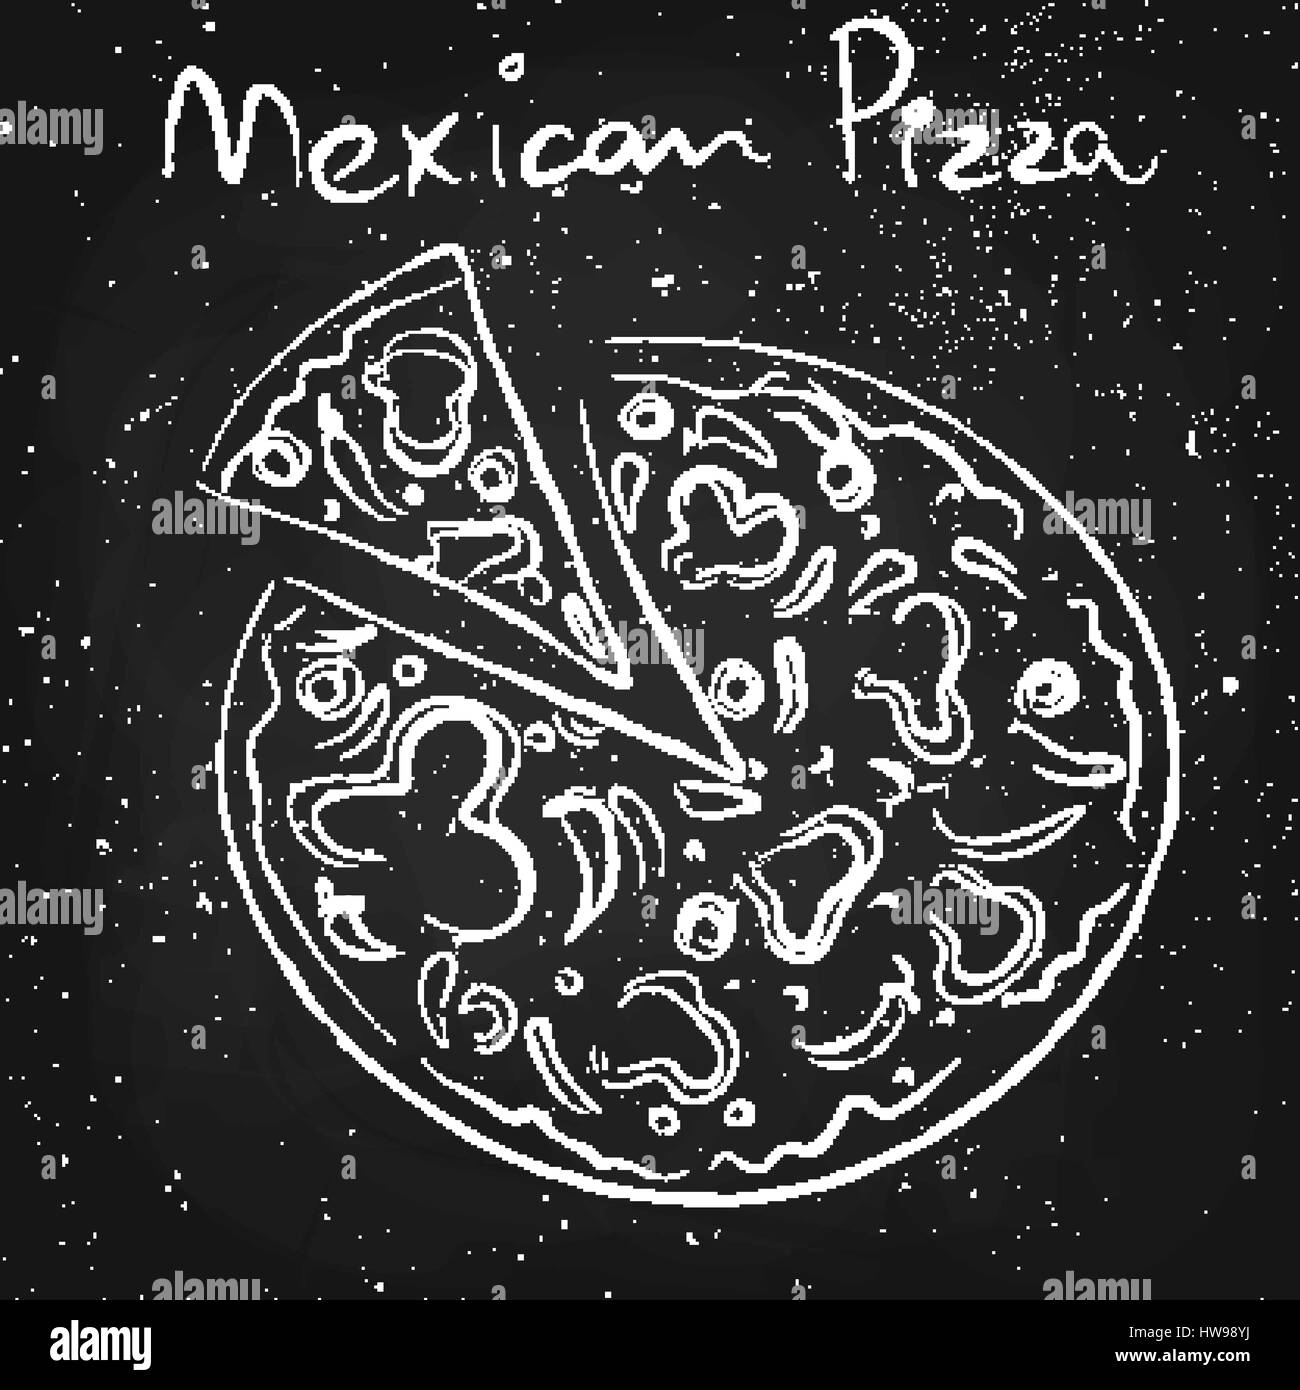 Mexican pizza, drawn in chalk on a blackboard Stock Vector